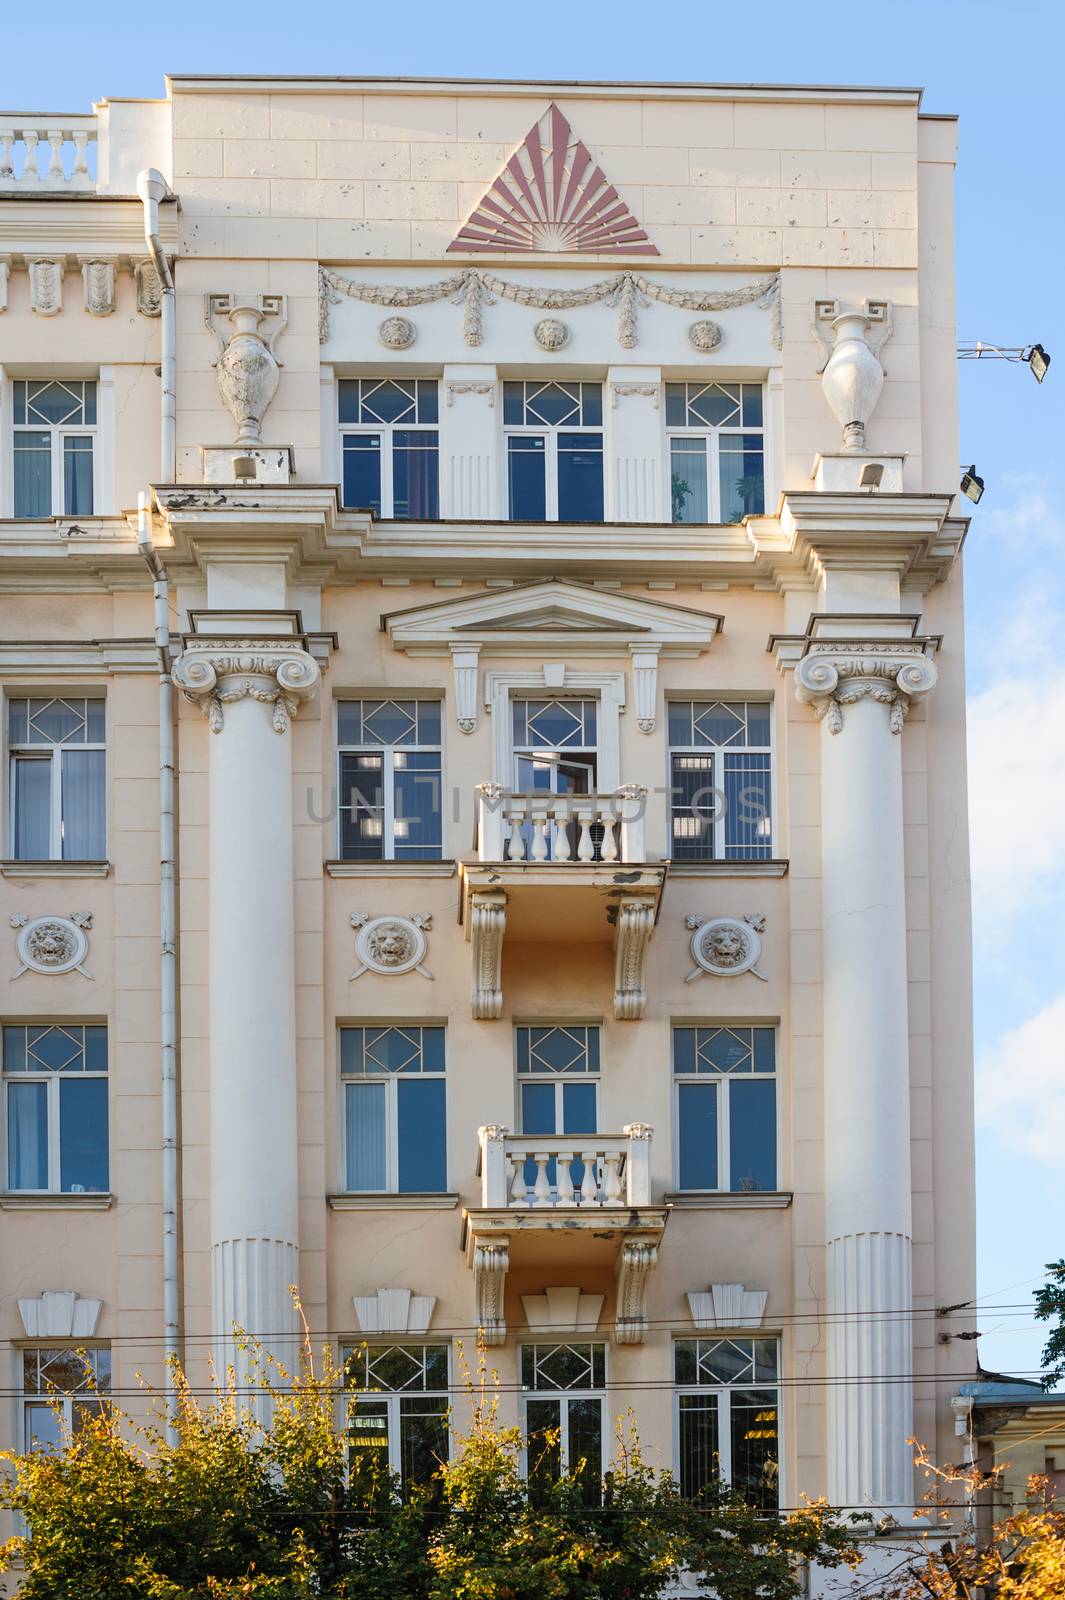 facade of an old building with white columns and balconies.